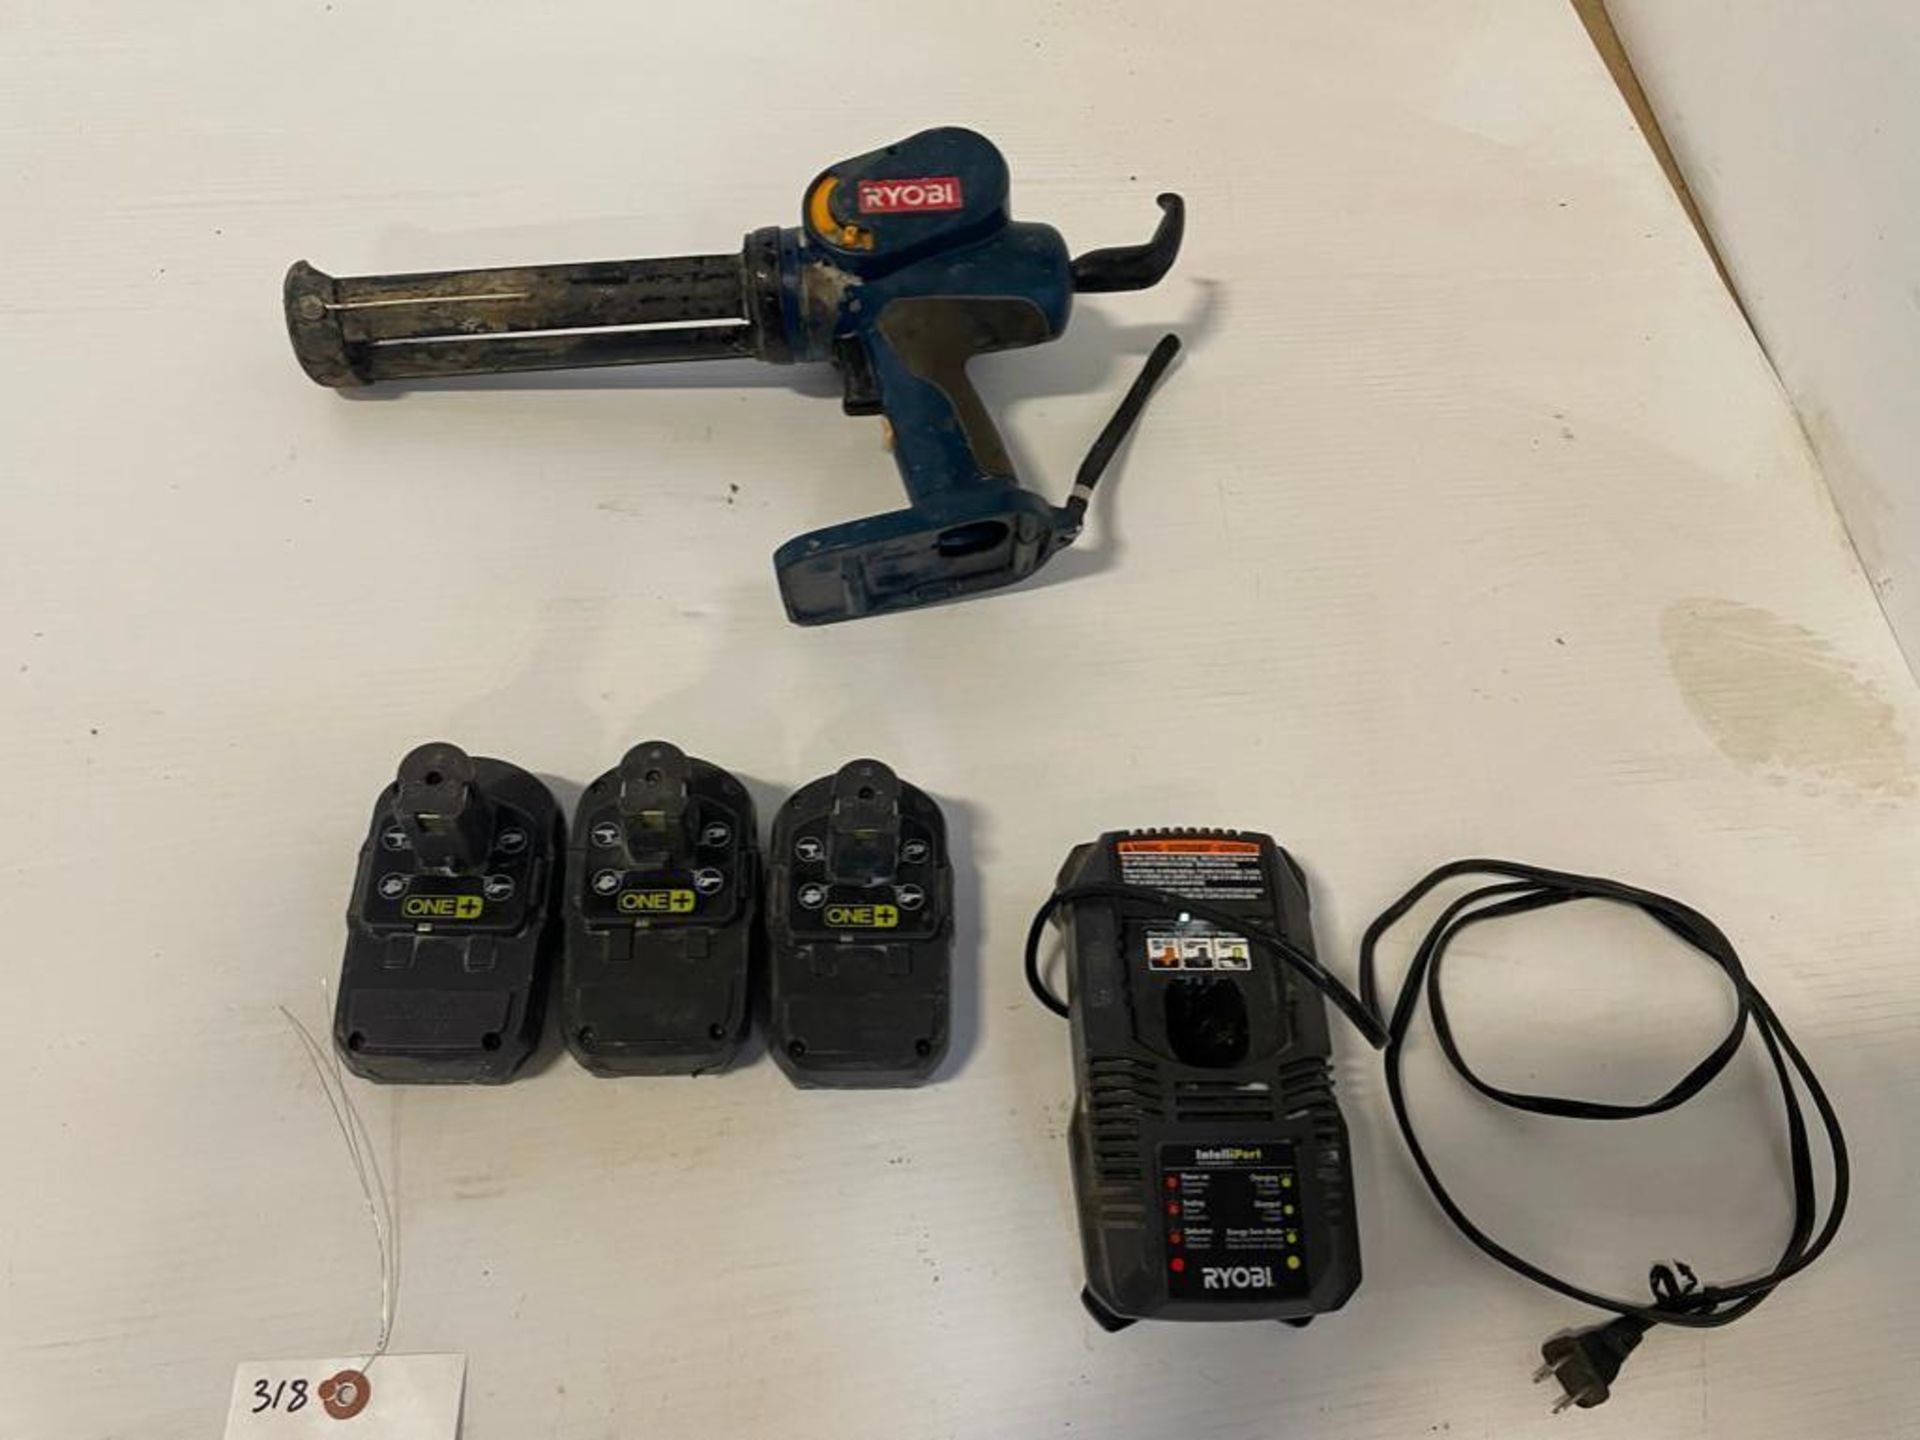 Ryobi R310 Power Caulk and Adhesive Gun w/Batteries & Charger . 18V. Located in Hazelwood, MO - Image 2 of 8